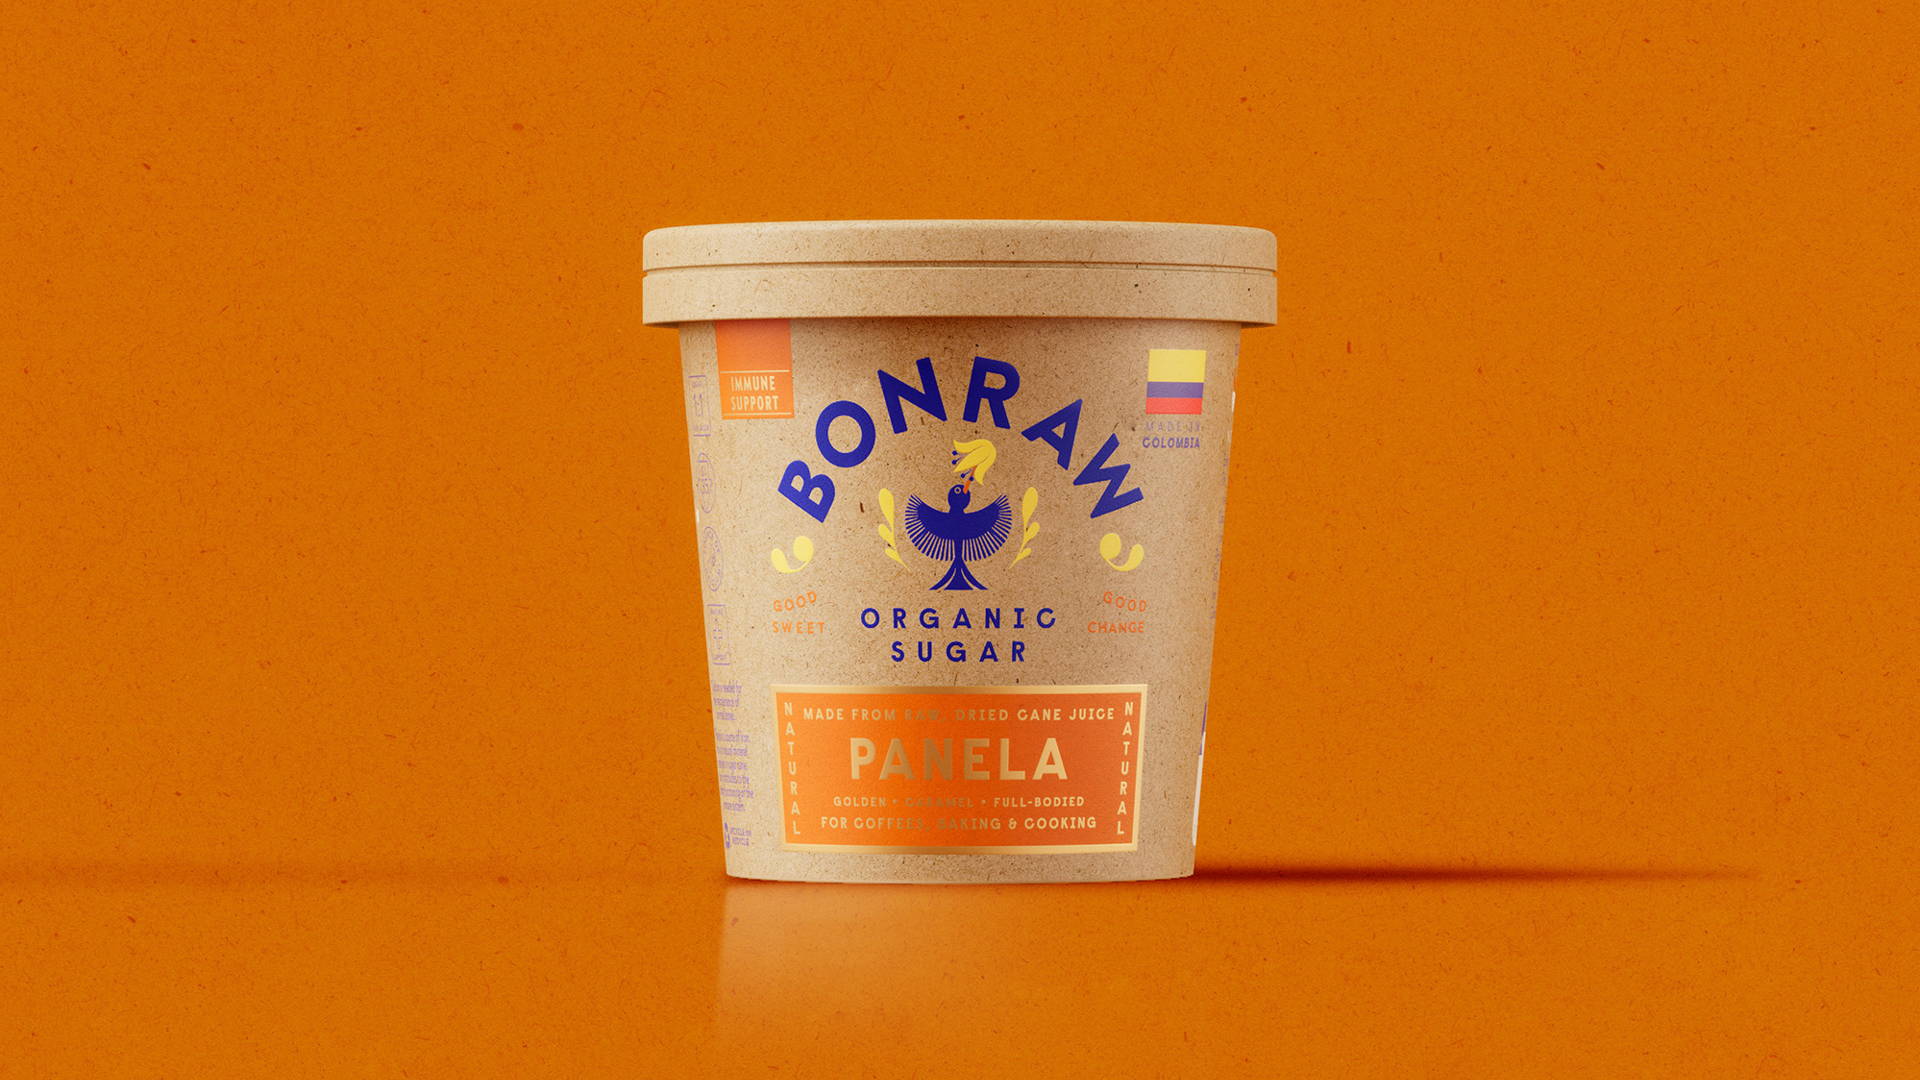 Featured image for Bonraw Organic Sugars and Natural Sweeteners' Updated Packaging